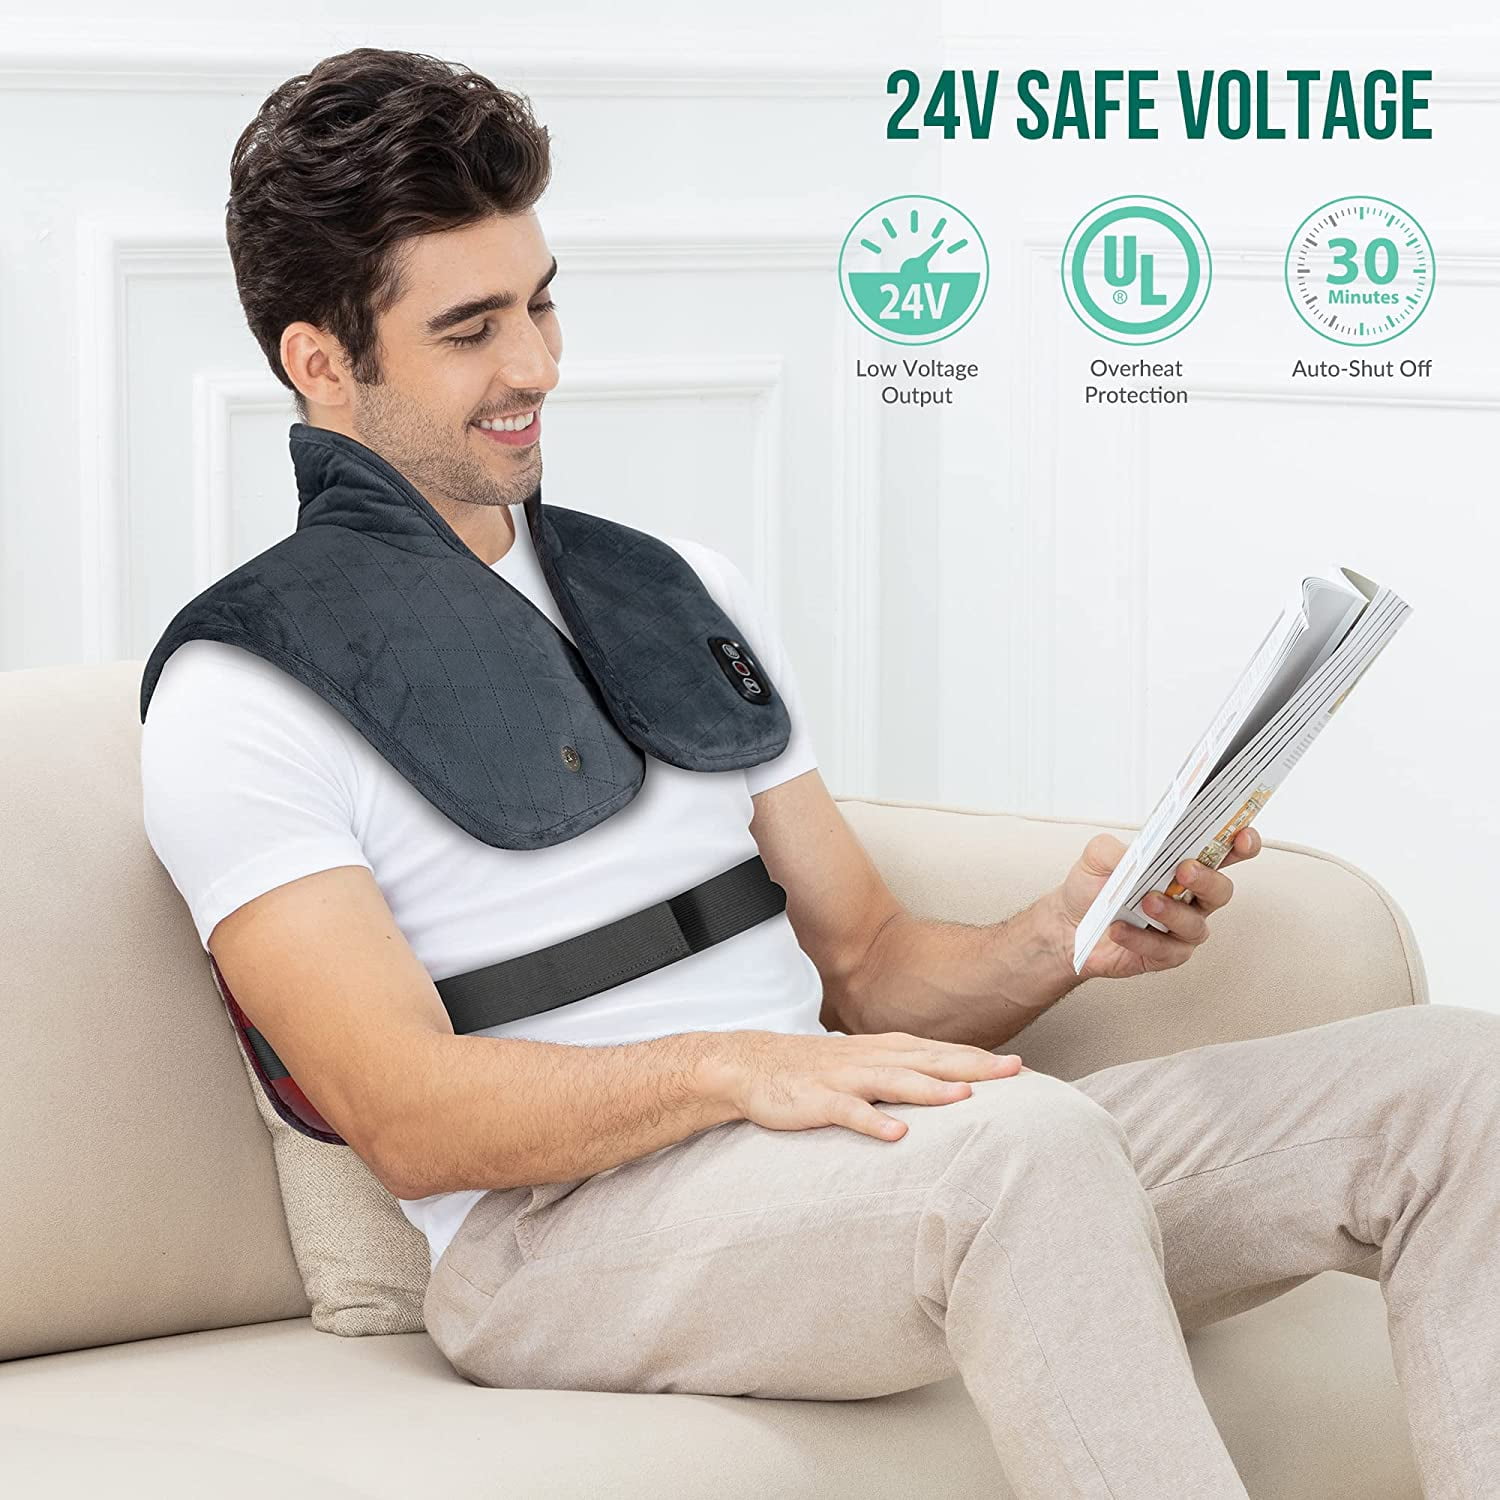 Snailax Heated Neck and Shoulder Massager, Electric Heating Pad for Back  Pain Relief, Heat Wrap with Adjustable Levels & Vibration Massage, Gifts